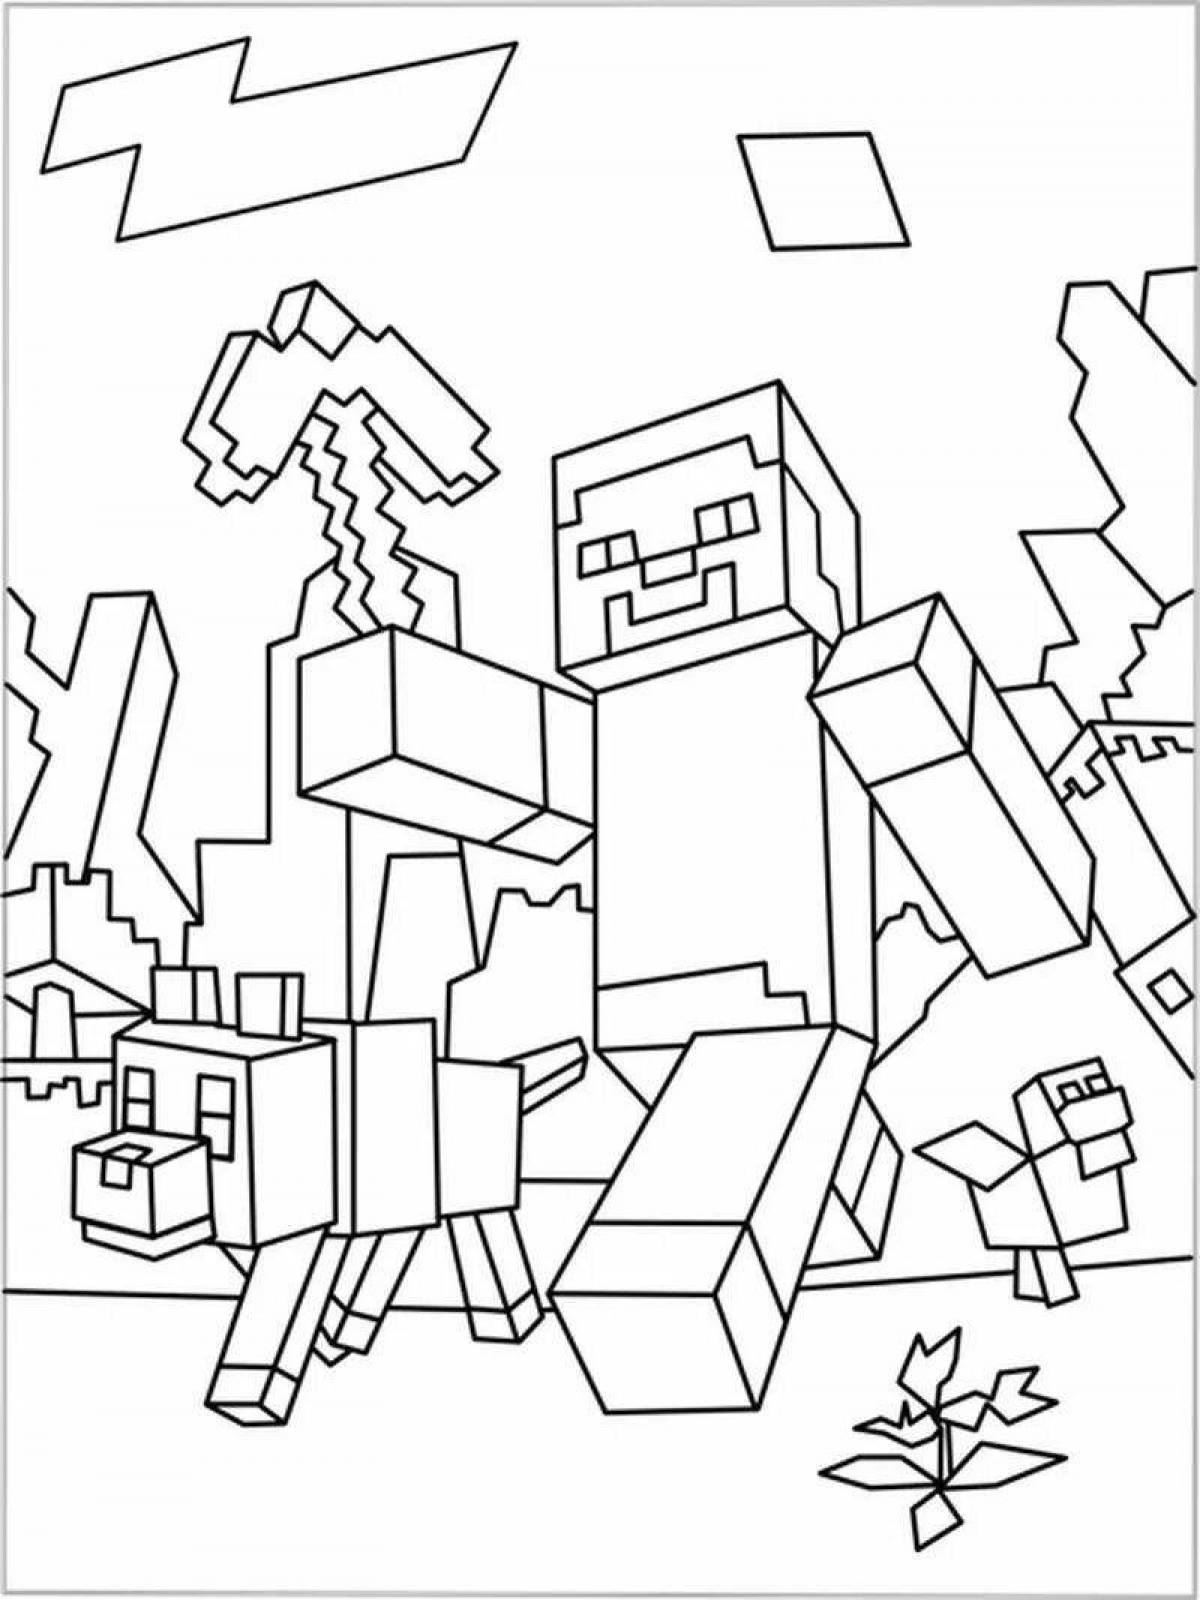 Fascinating minecraft ghost coloring page